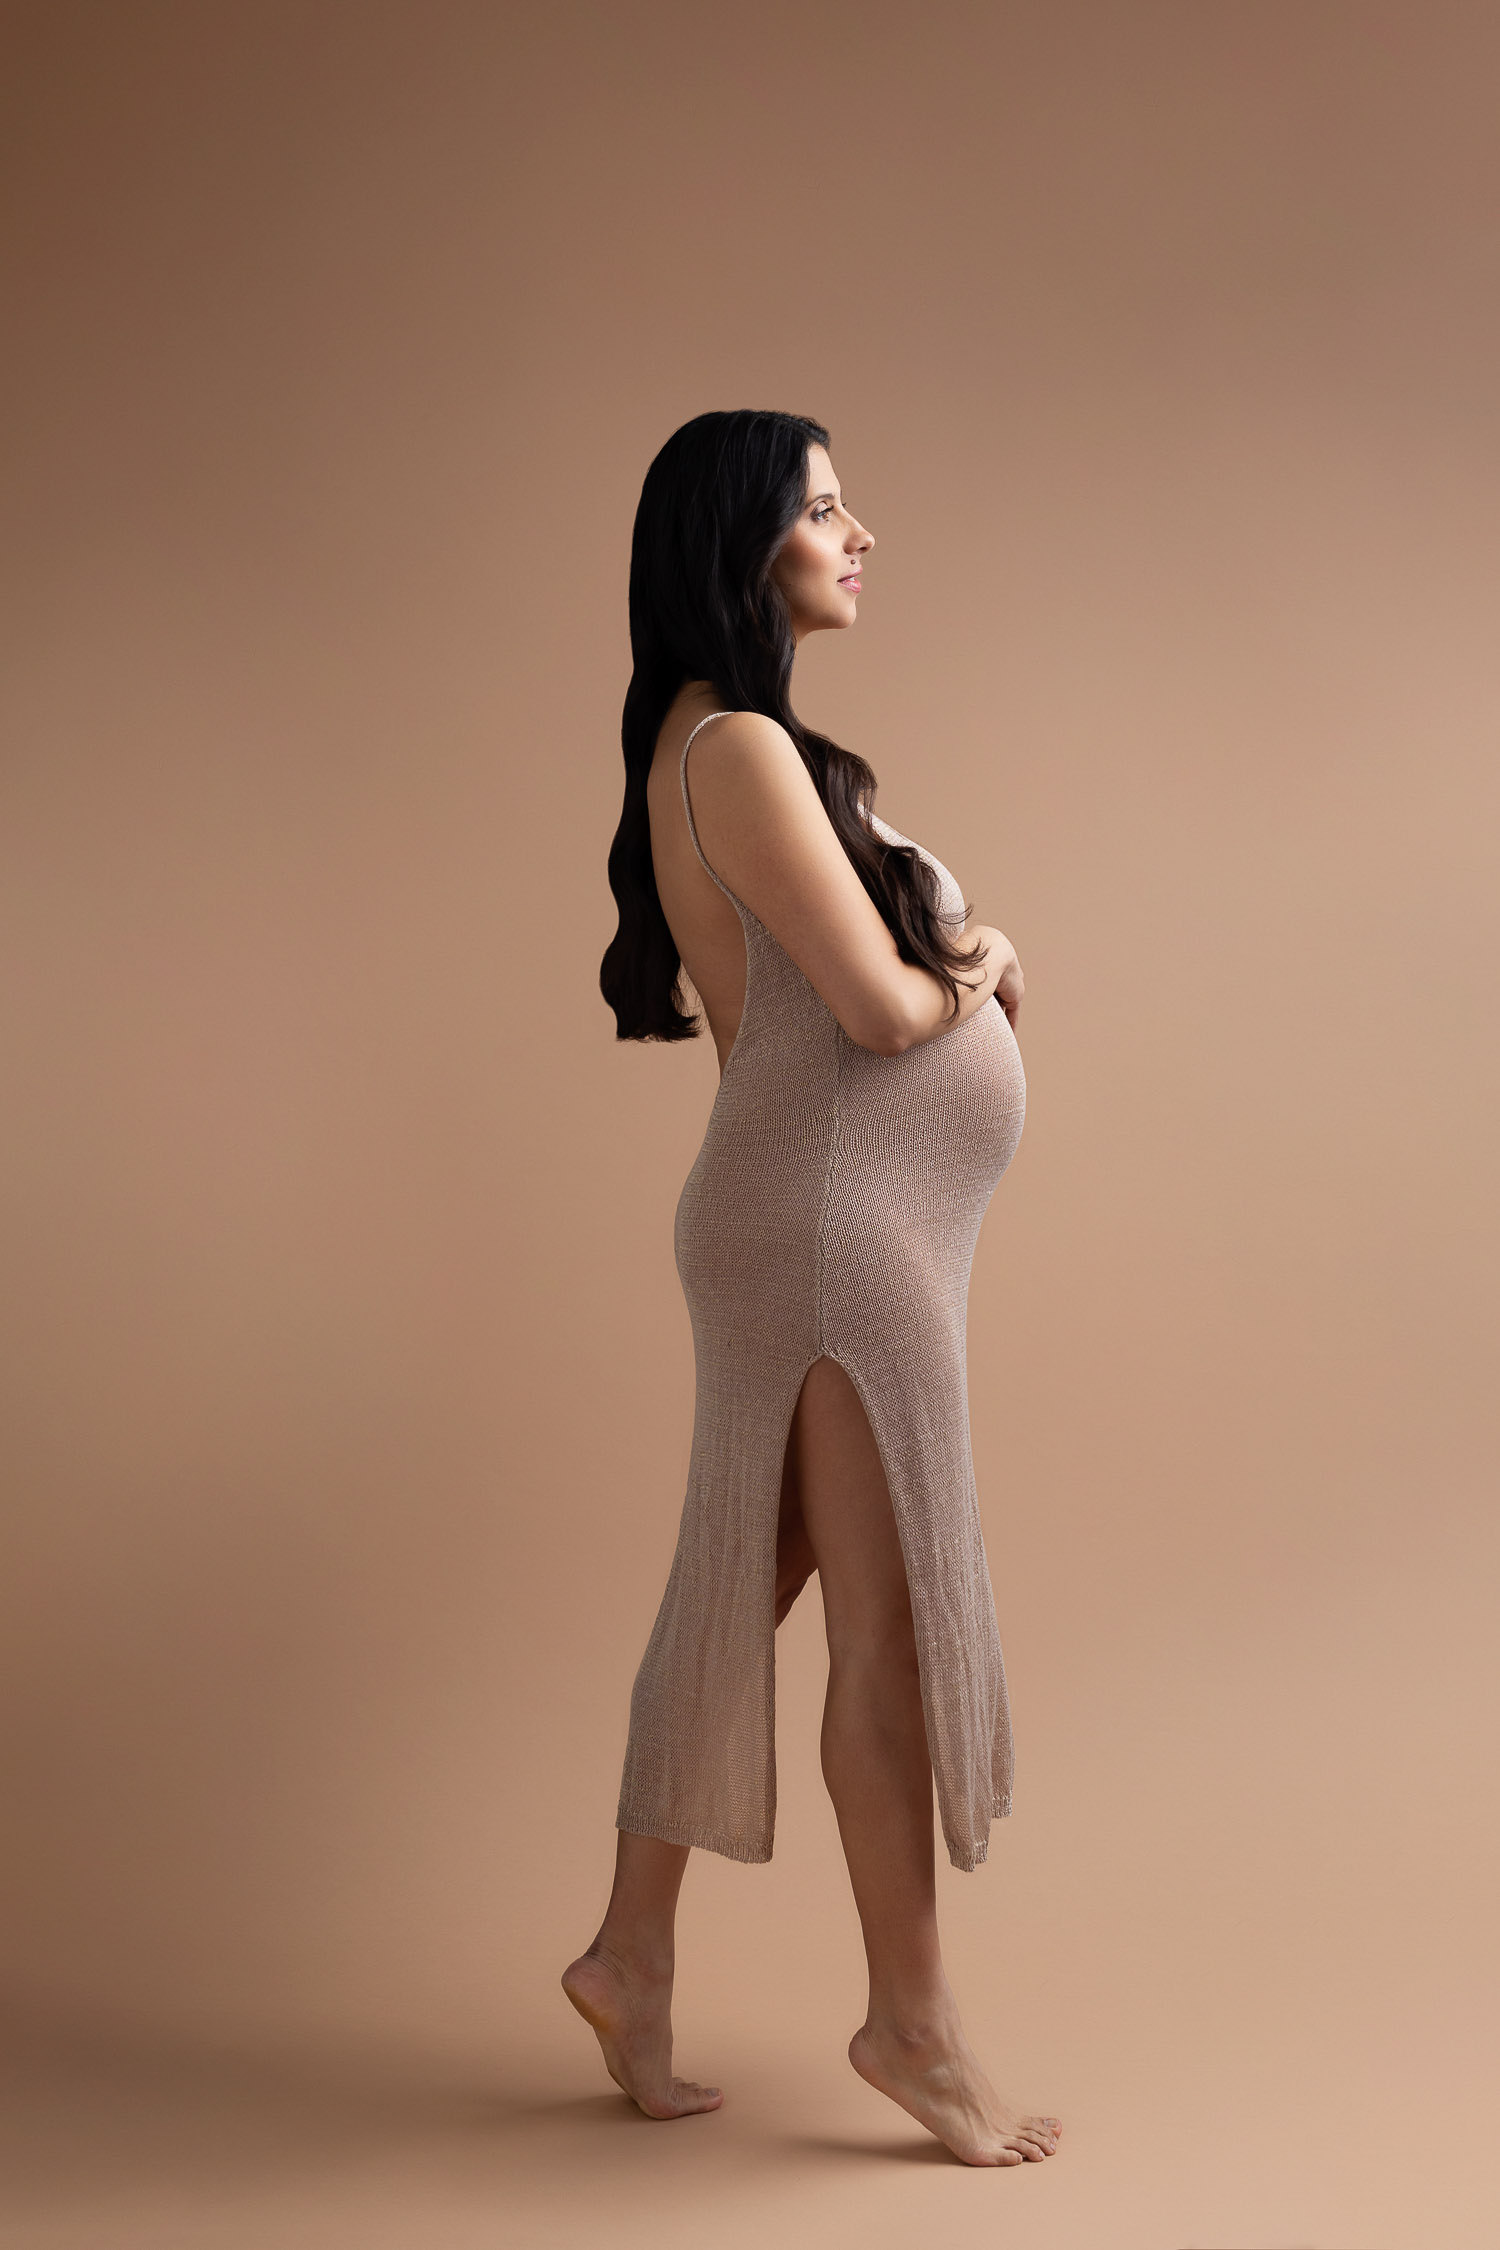 Clean maternity session